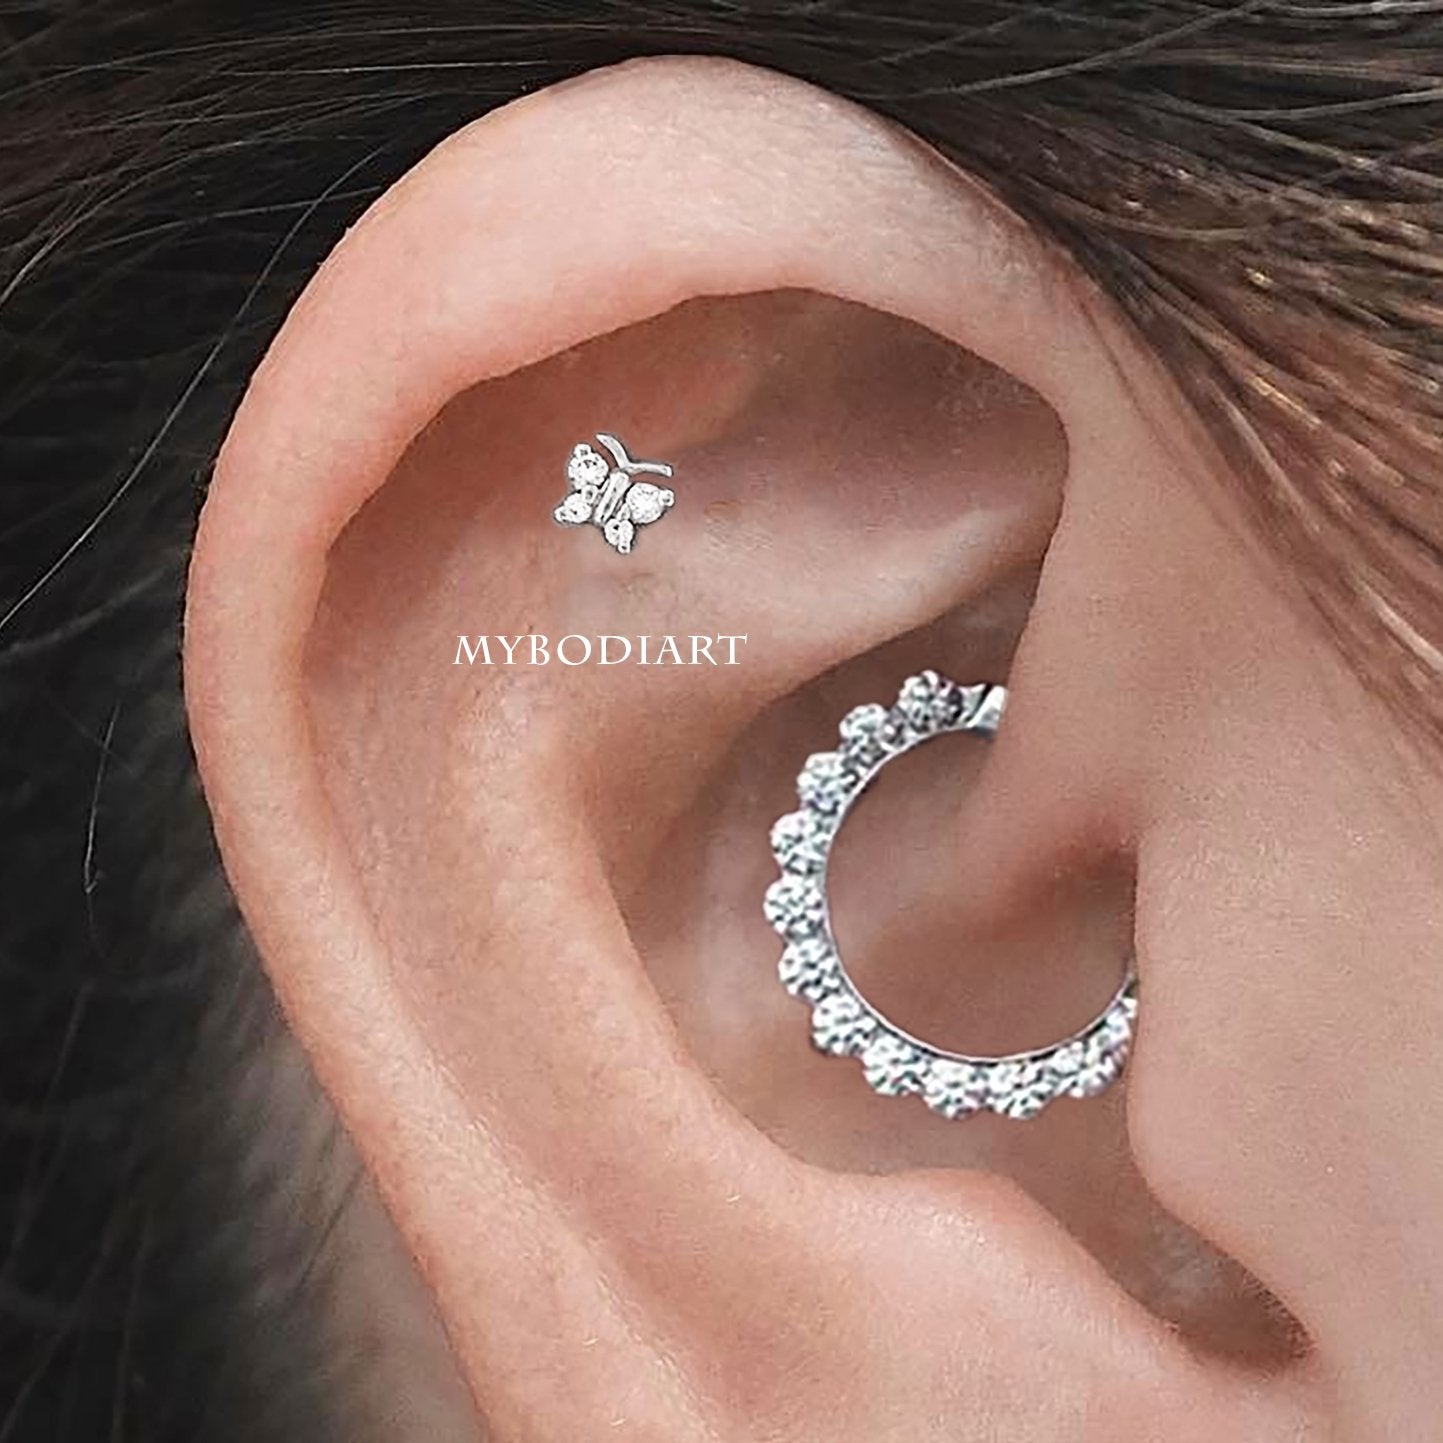 9K Solid White Gold 6mm Crystal Clicker Hoop Earring with Crystal Trio Charm